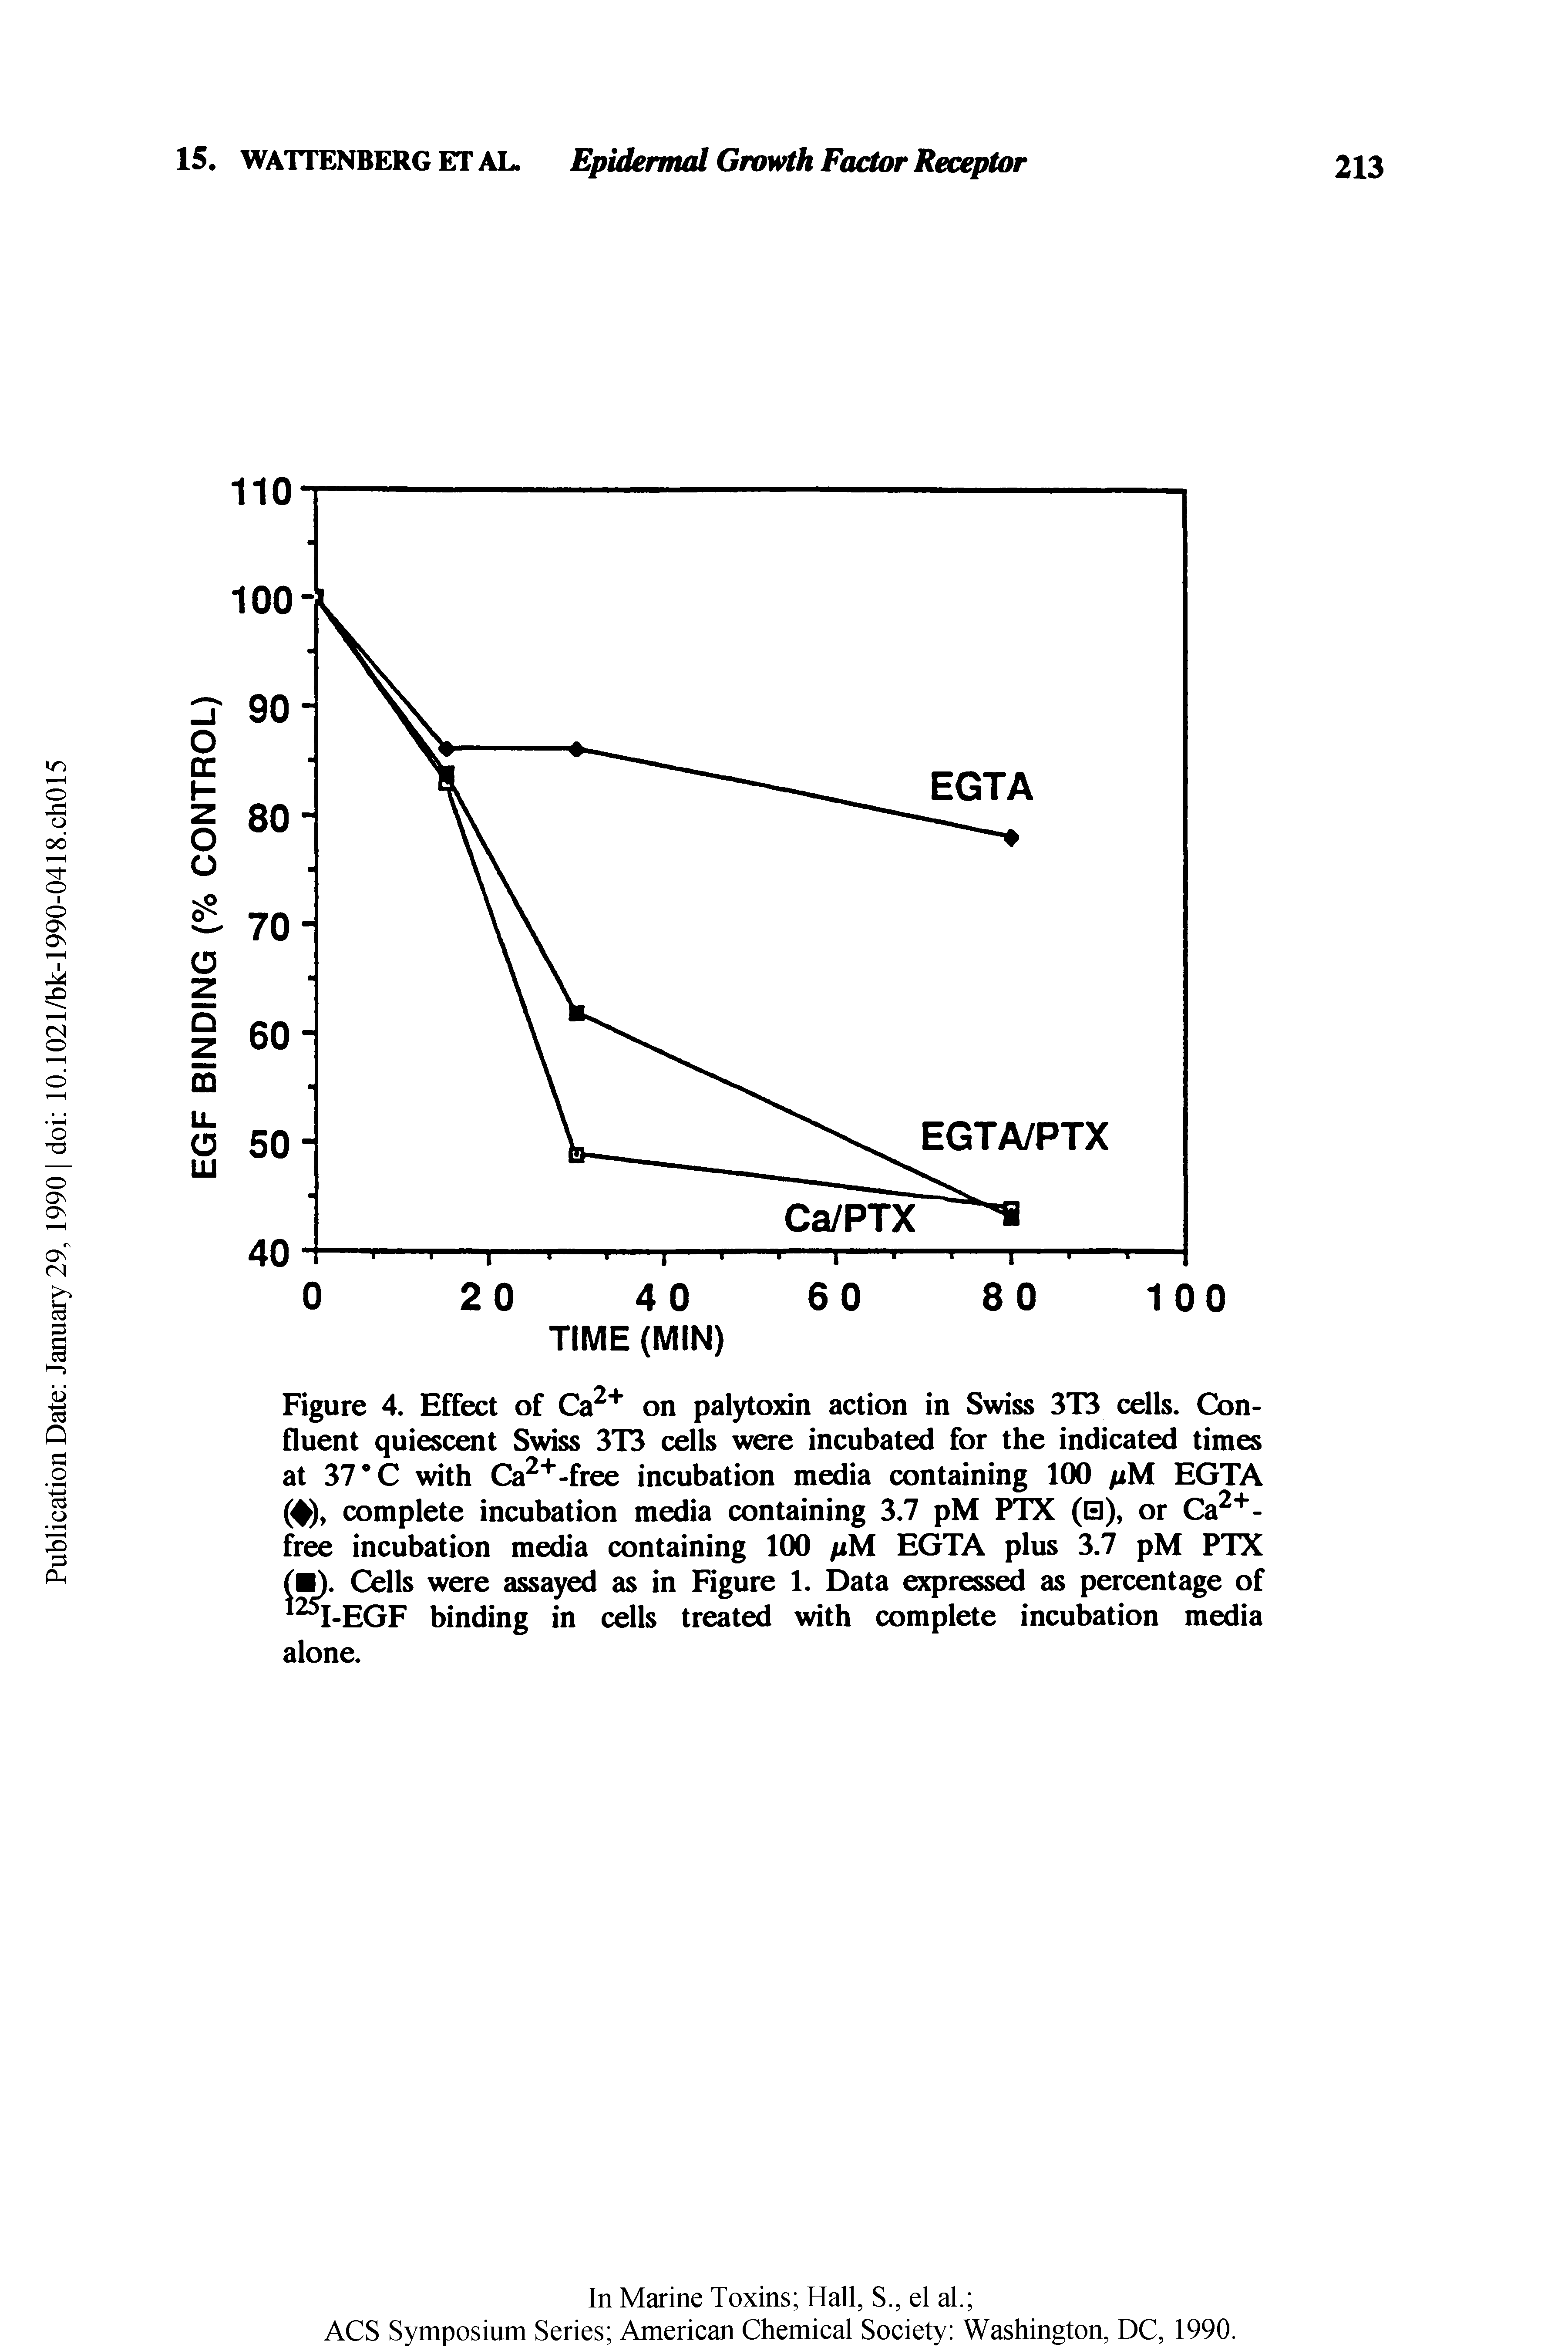 Figure 4. Effect of Ca on palytoxin action in Swiss 3T3 cells. Confluent quiescent Swiss 3T3 cells were incubated for the indicated times at 37 C with Ca -free incubation media containing 100 pM EGTA (4), complete incubation media containing 3.7 pM PTX (0), or Ca -free incubation media containing 100 pM EGTA plus 3.7 pM PTX Cells were assayed as in Figure 1. Data expressed as percentage of I-EGF binding in cells treated with complete incubation media alone.